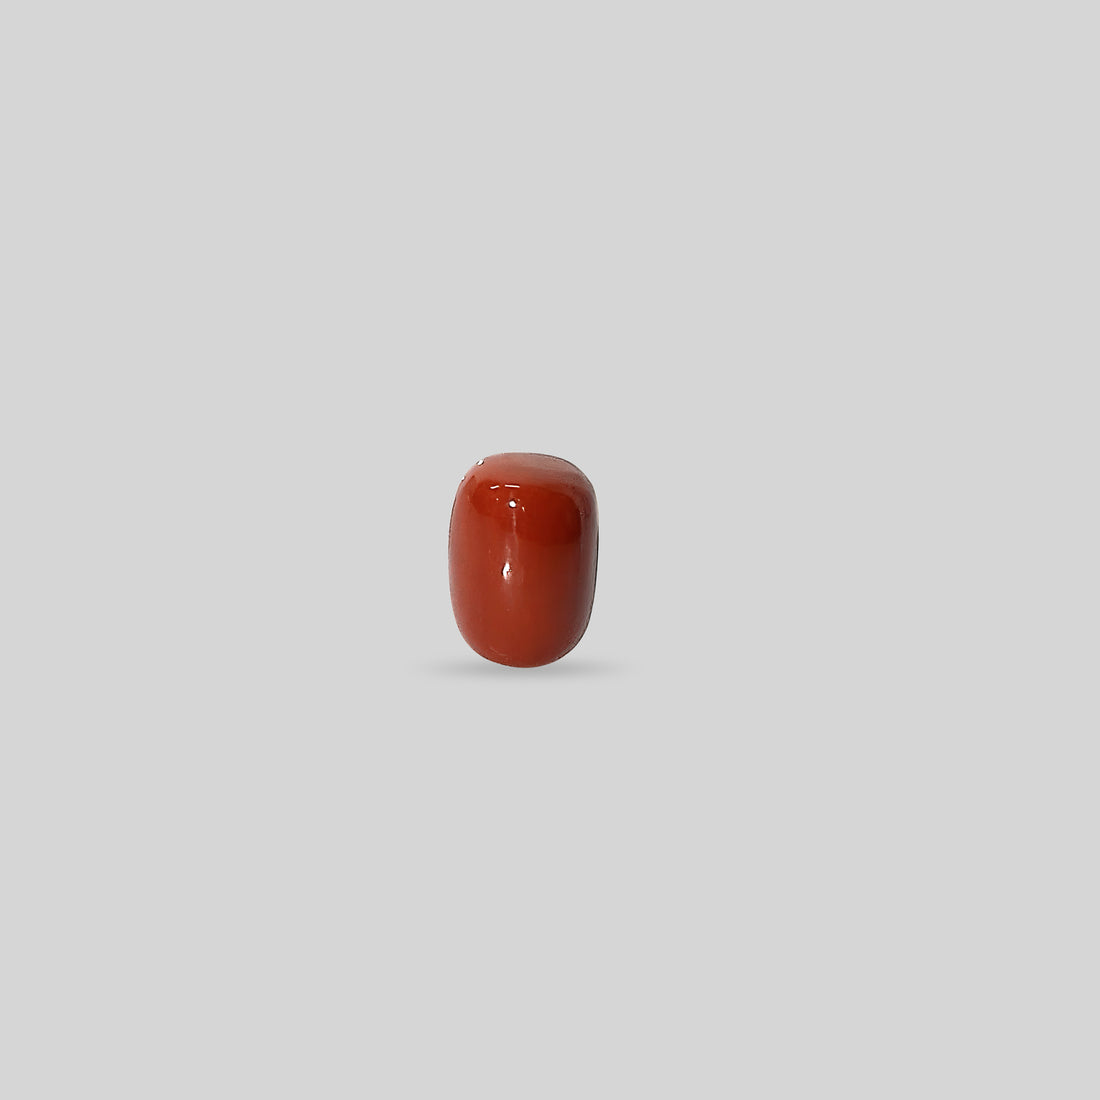 Italian Red Coral - 15.03 Carats